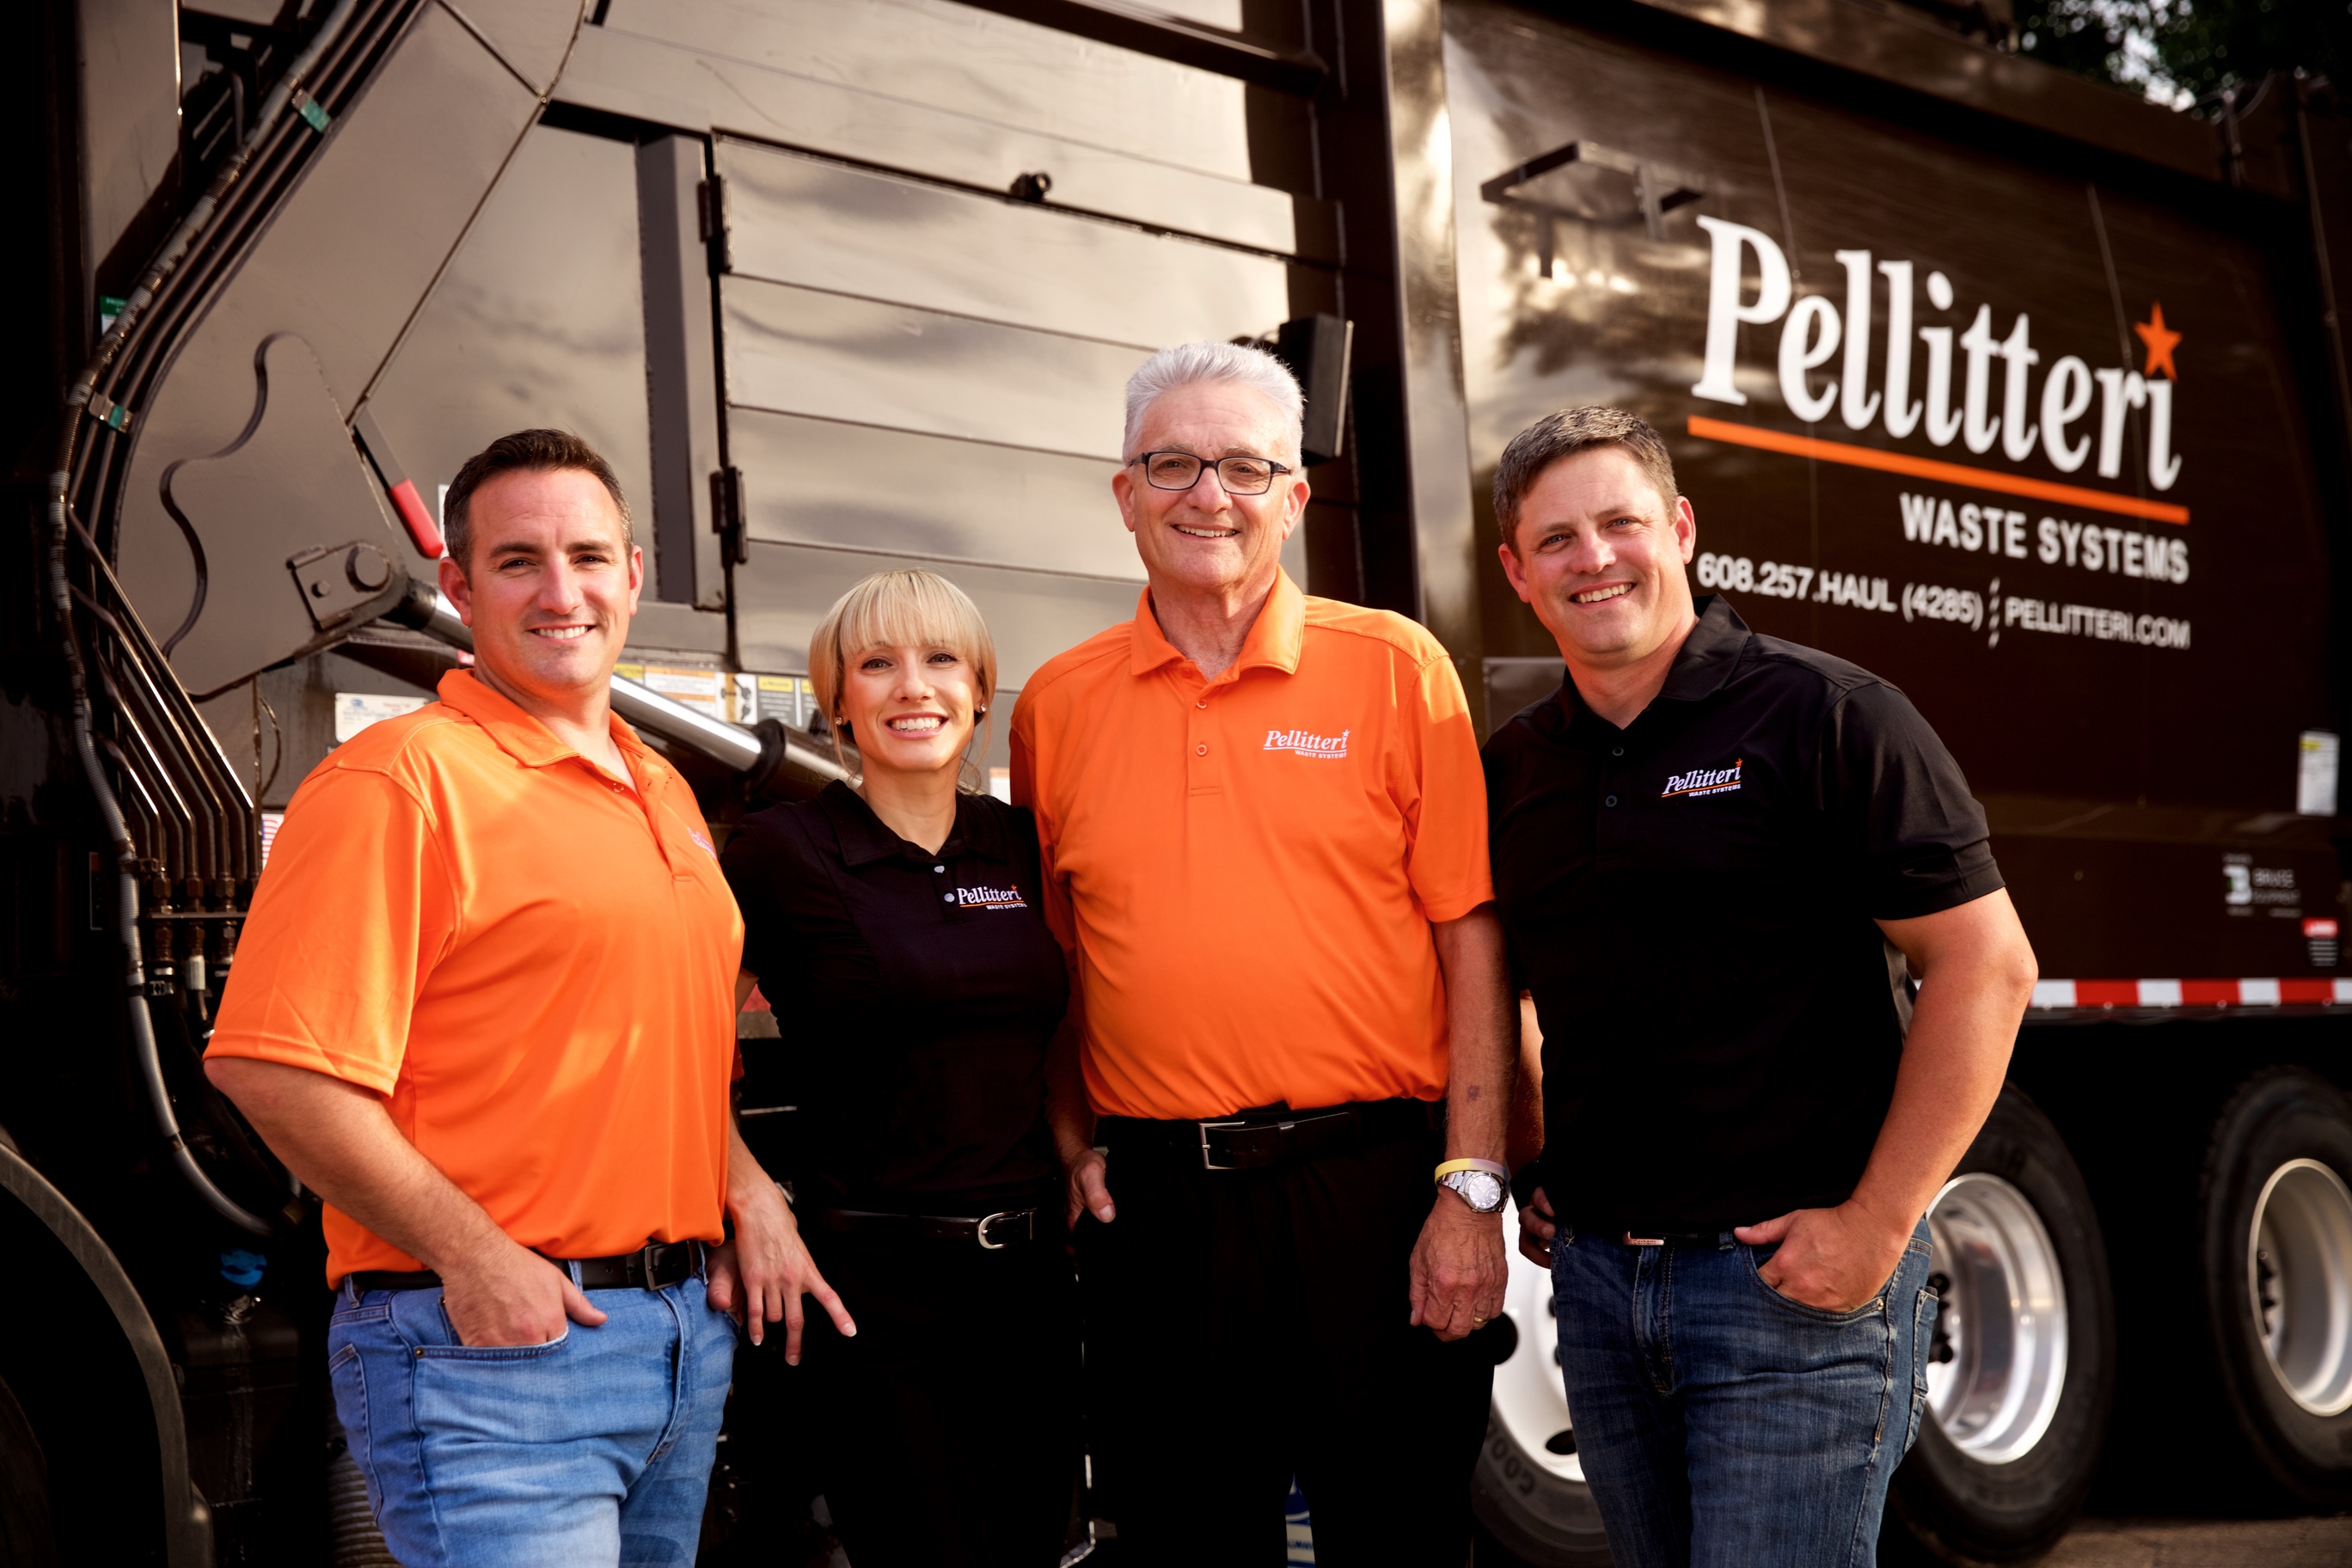 Pellitteri Waste Systems lands new contracts for curbside waste